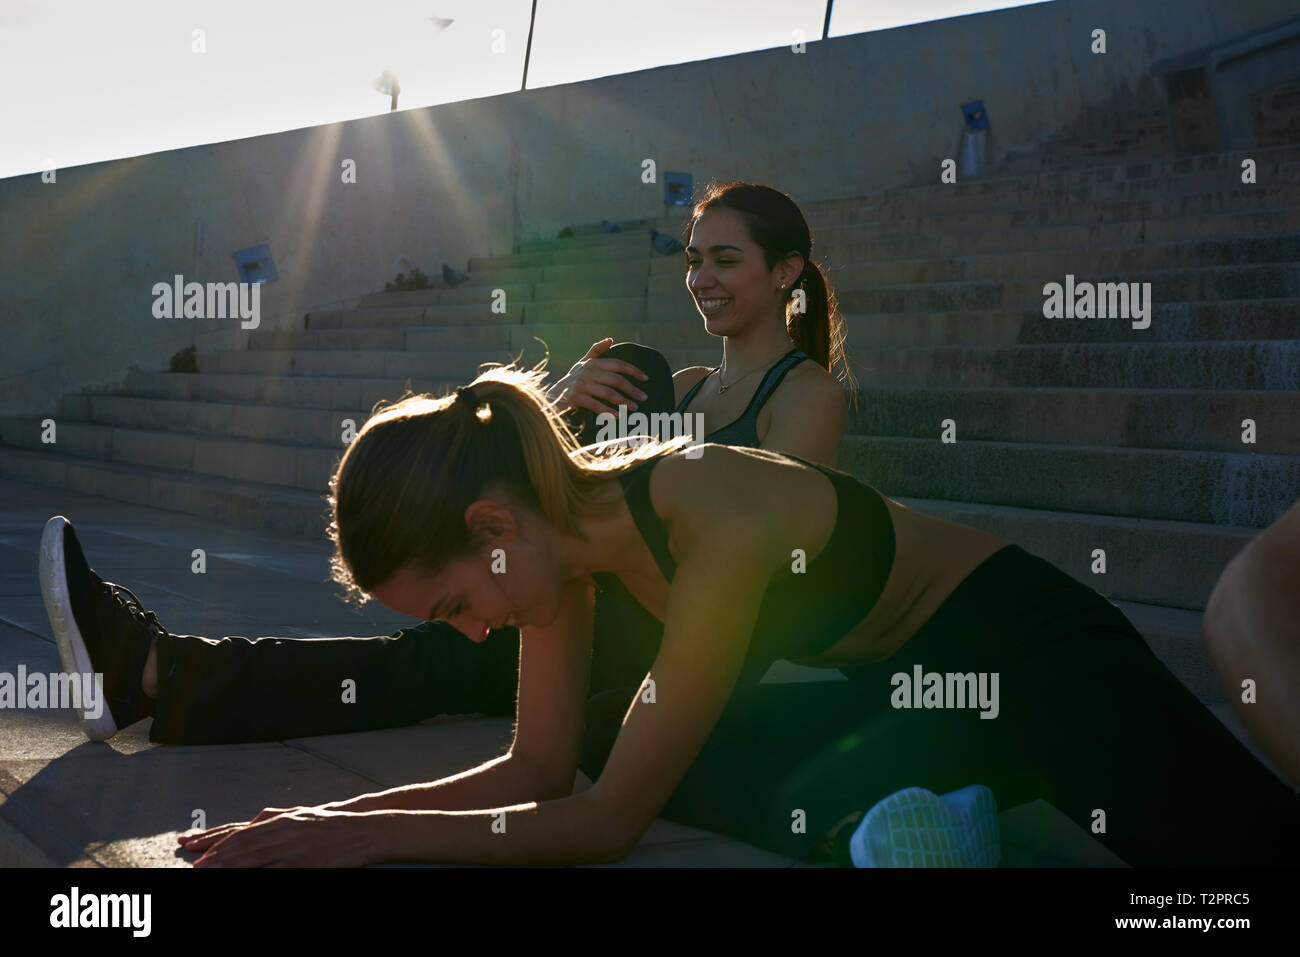 Friends stretching on steps in sports stadium Stock Photo